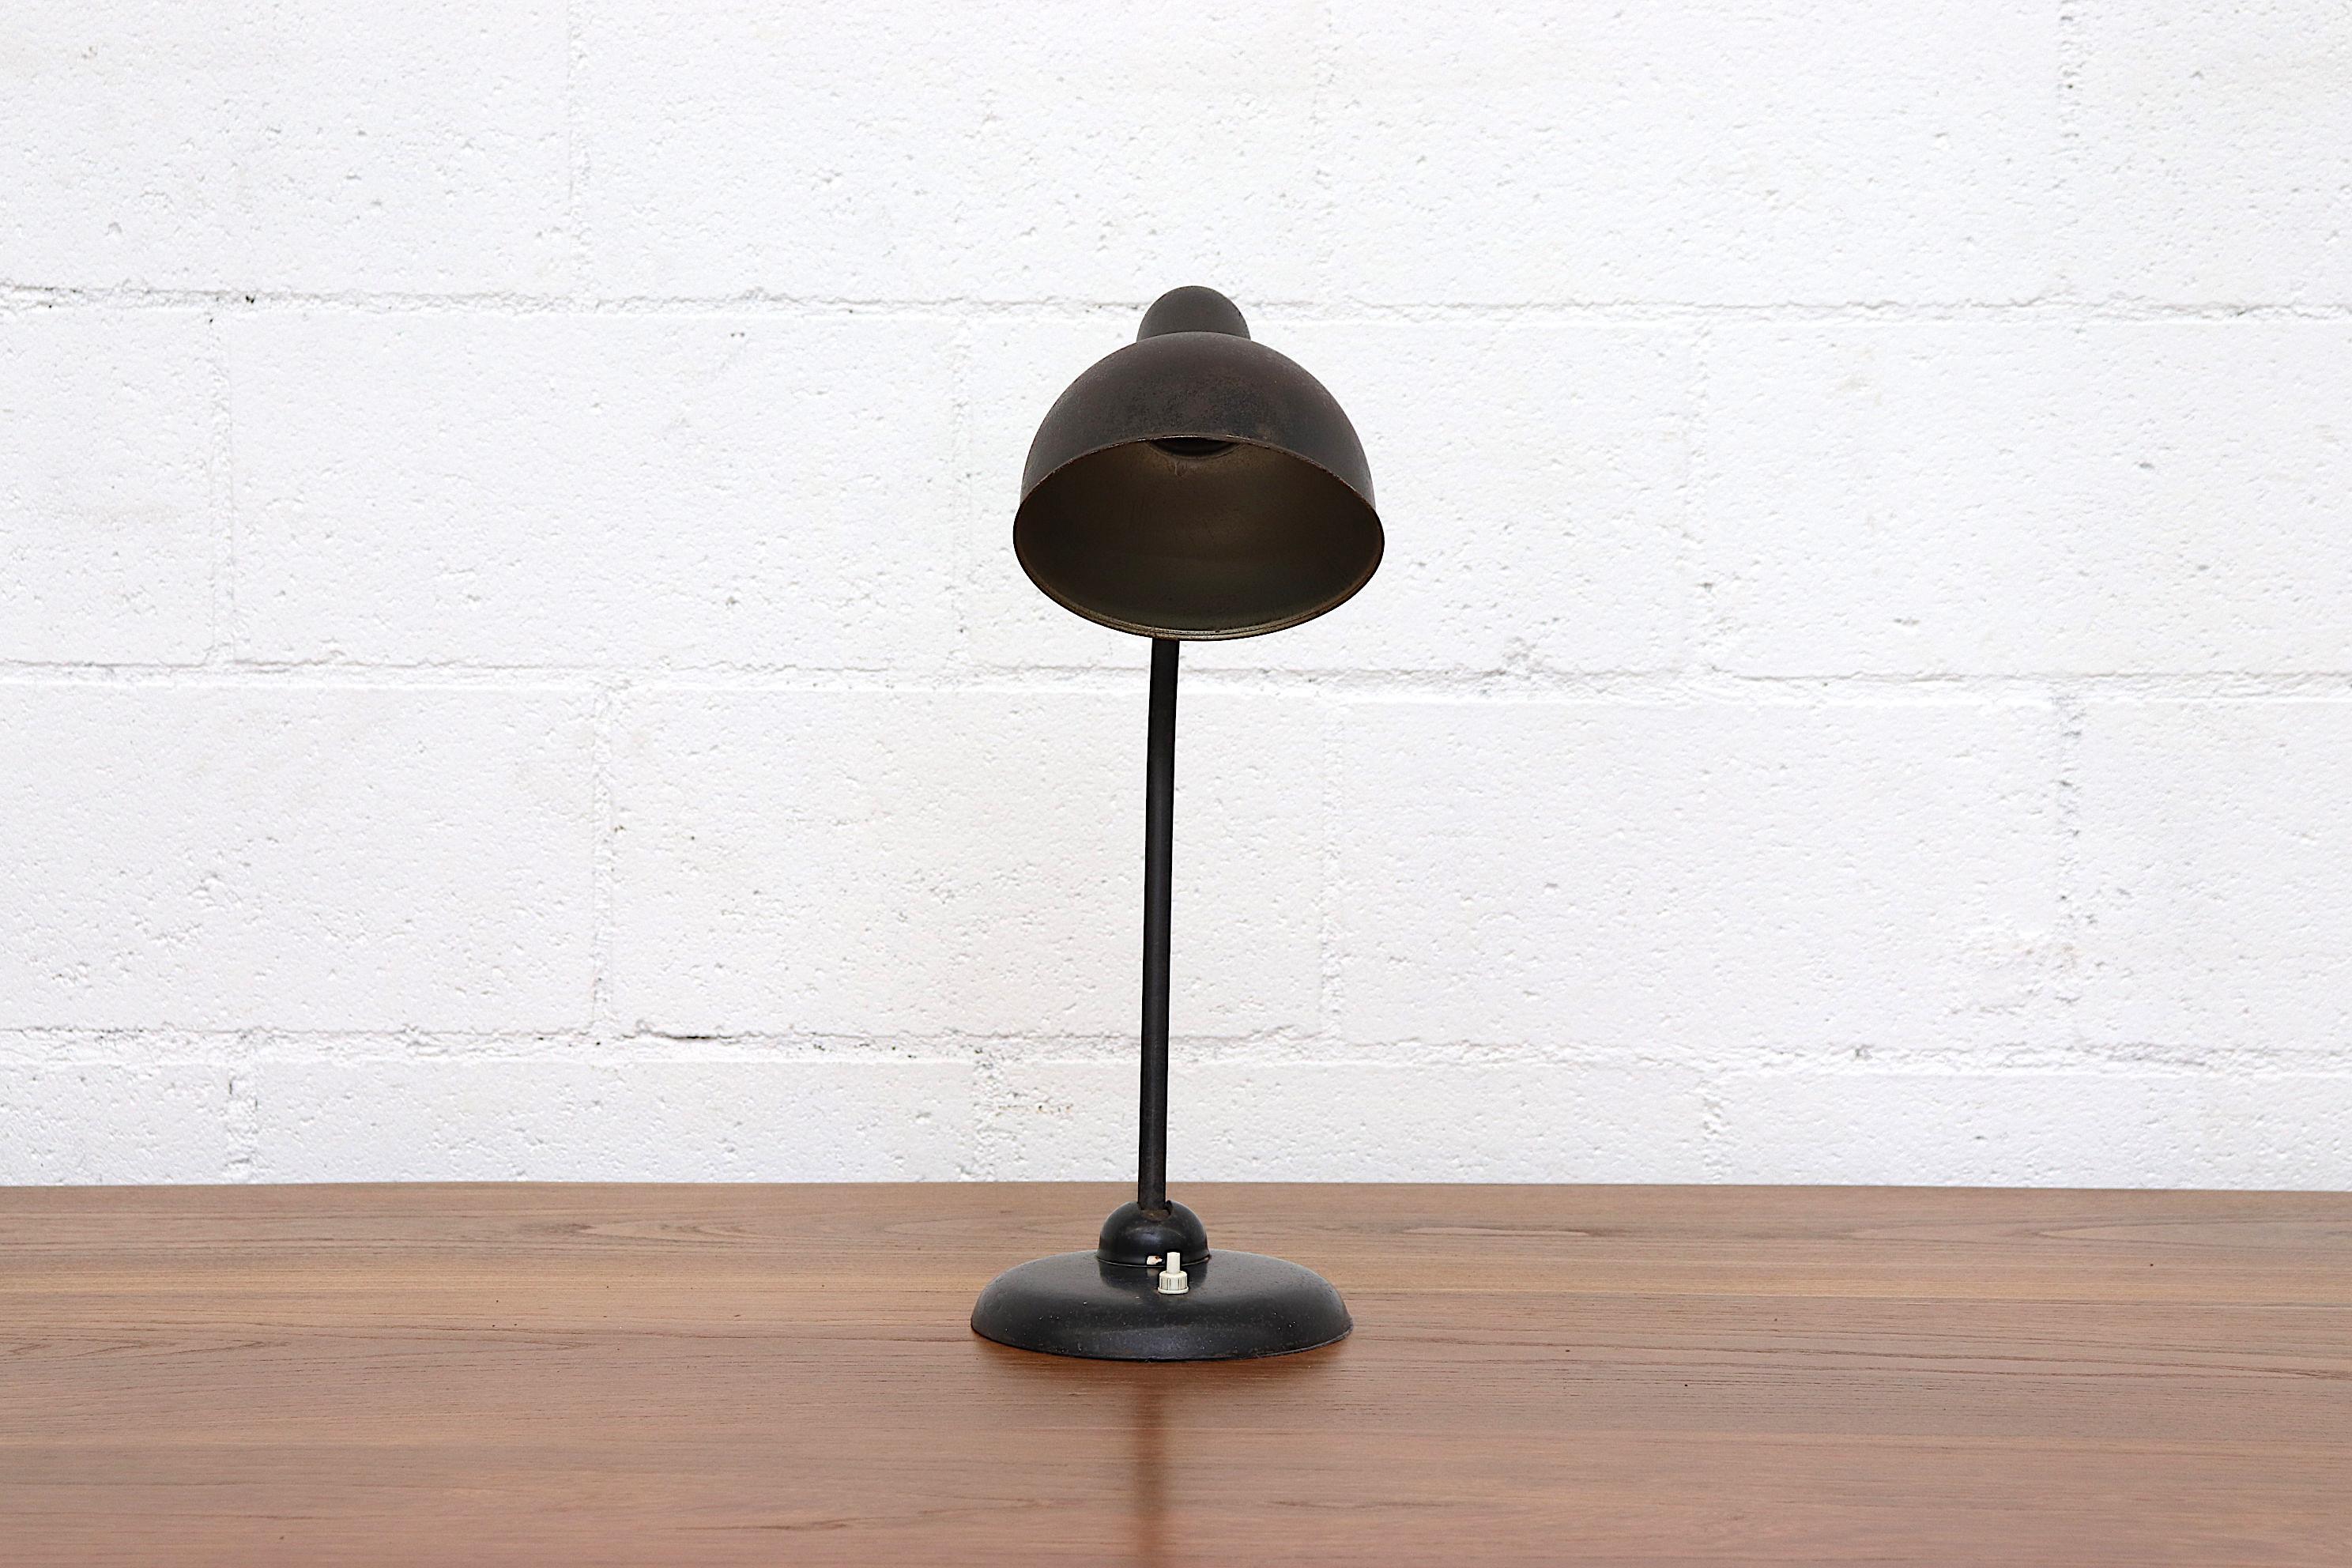 Black enameled Kaiser Idell table lamp with swivel joint and original production stamp. Well patinaed with tilting arm and white acrylic light switch. CE marked and in original condition with visible wear and minimal surface rust consistent with age.